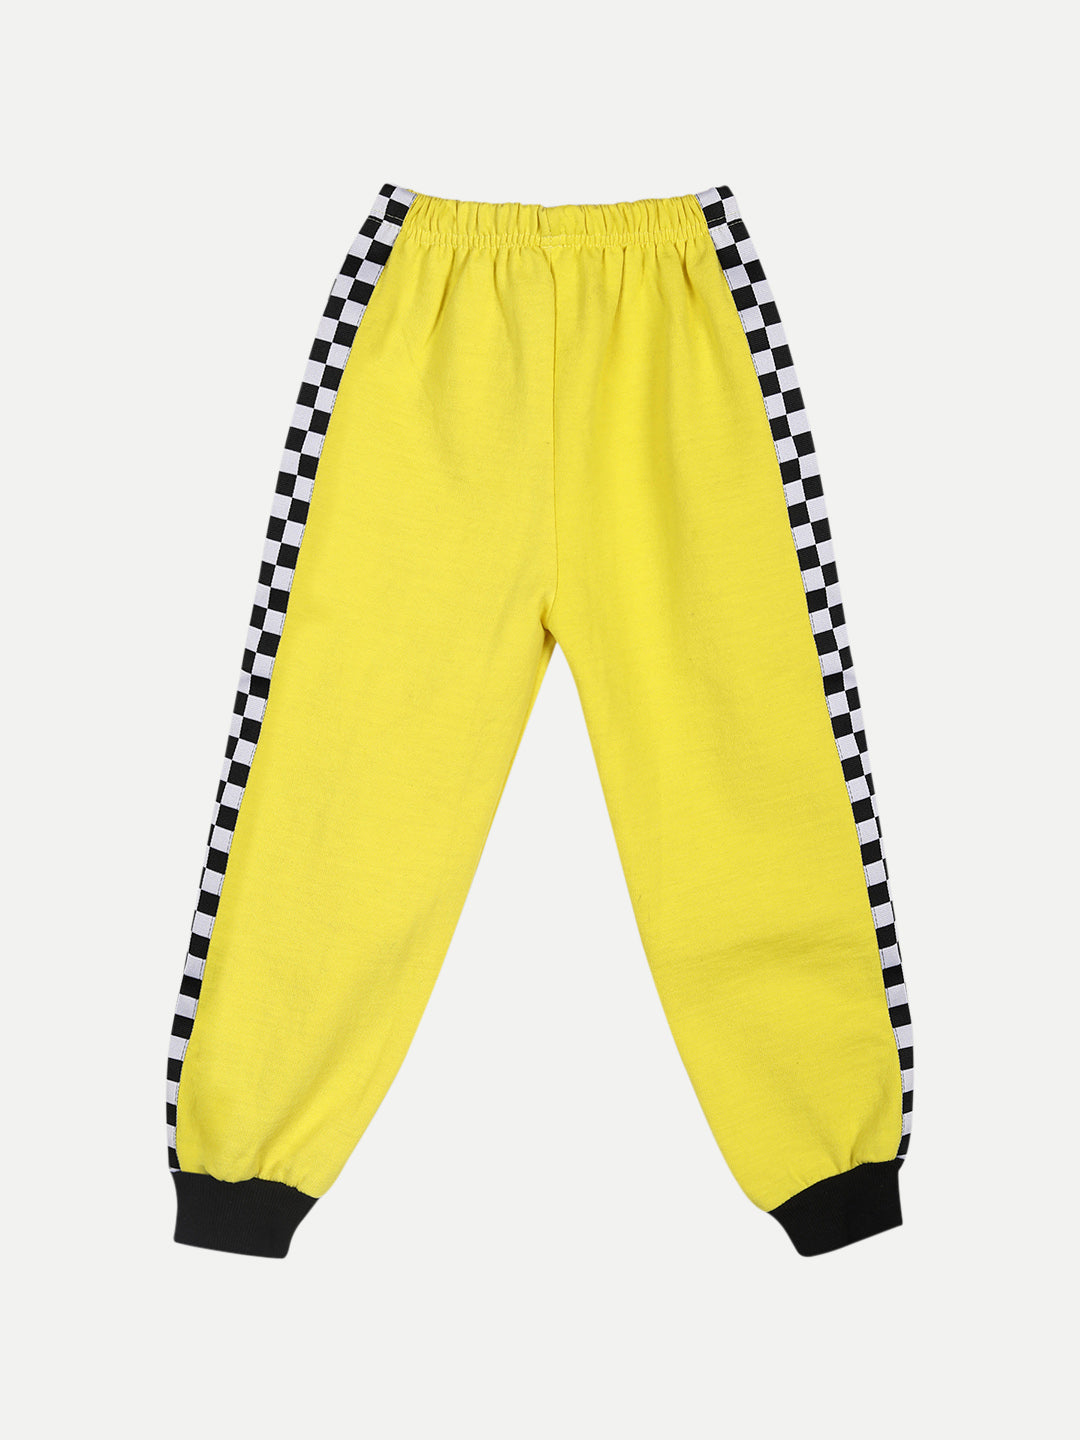 Cutiekins Pack Of 2 Tracksuit -Red & Yellow